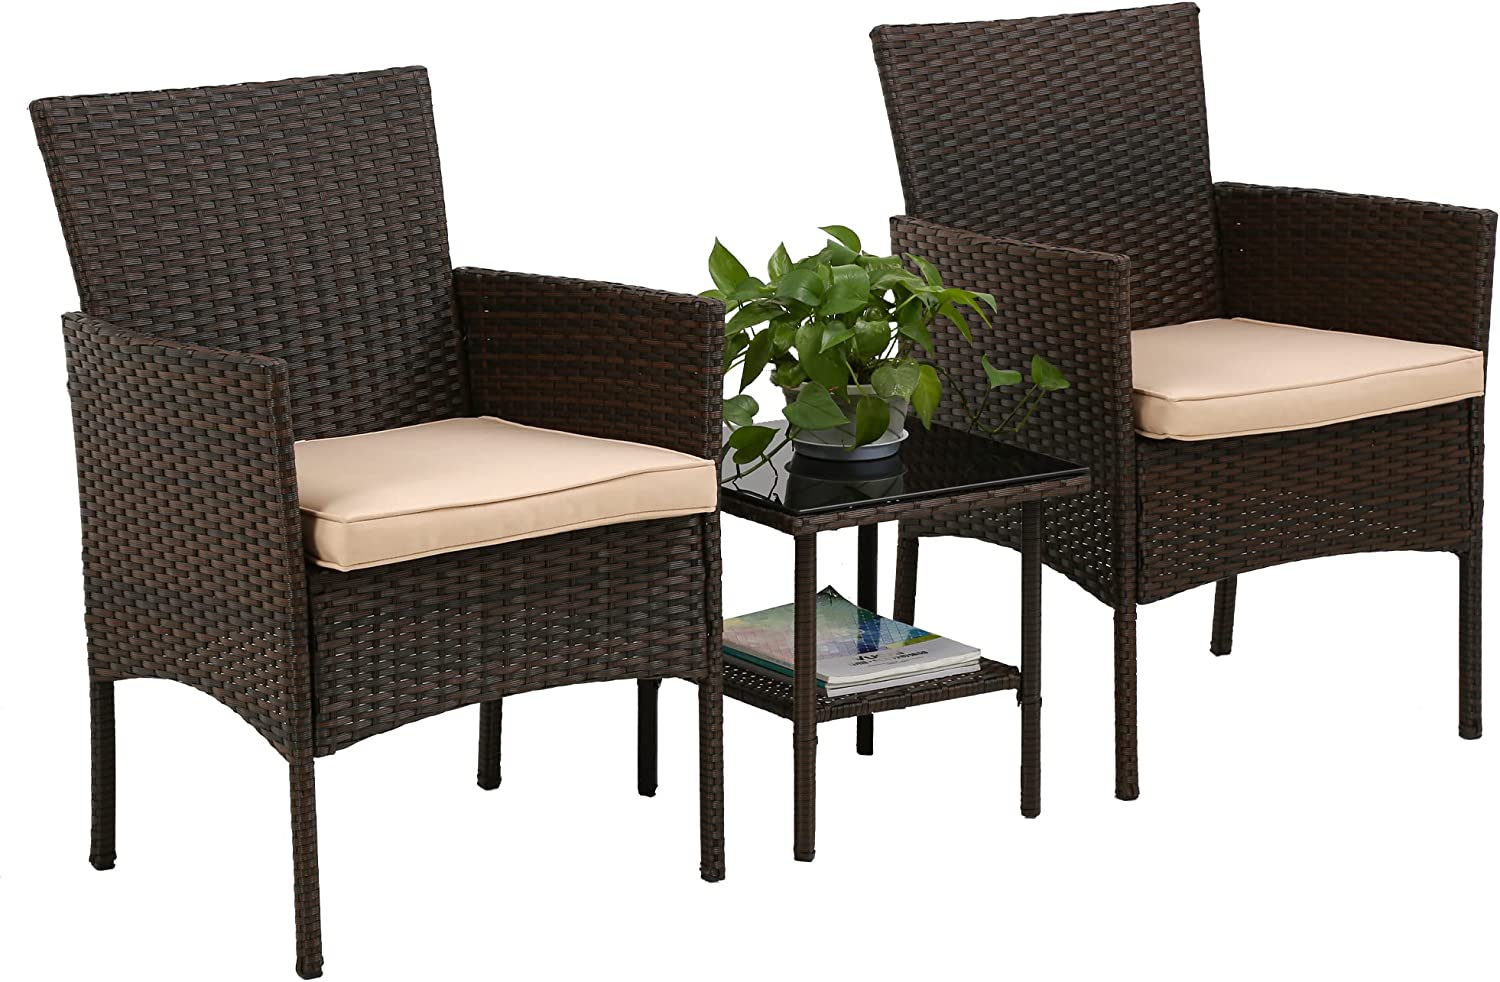 FDW Easy Assemble All-Weather Chairs Outdoor Furniture, 3-Piece